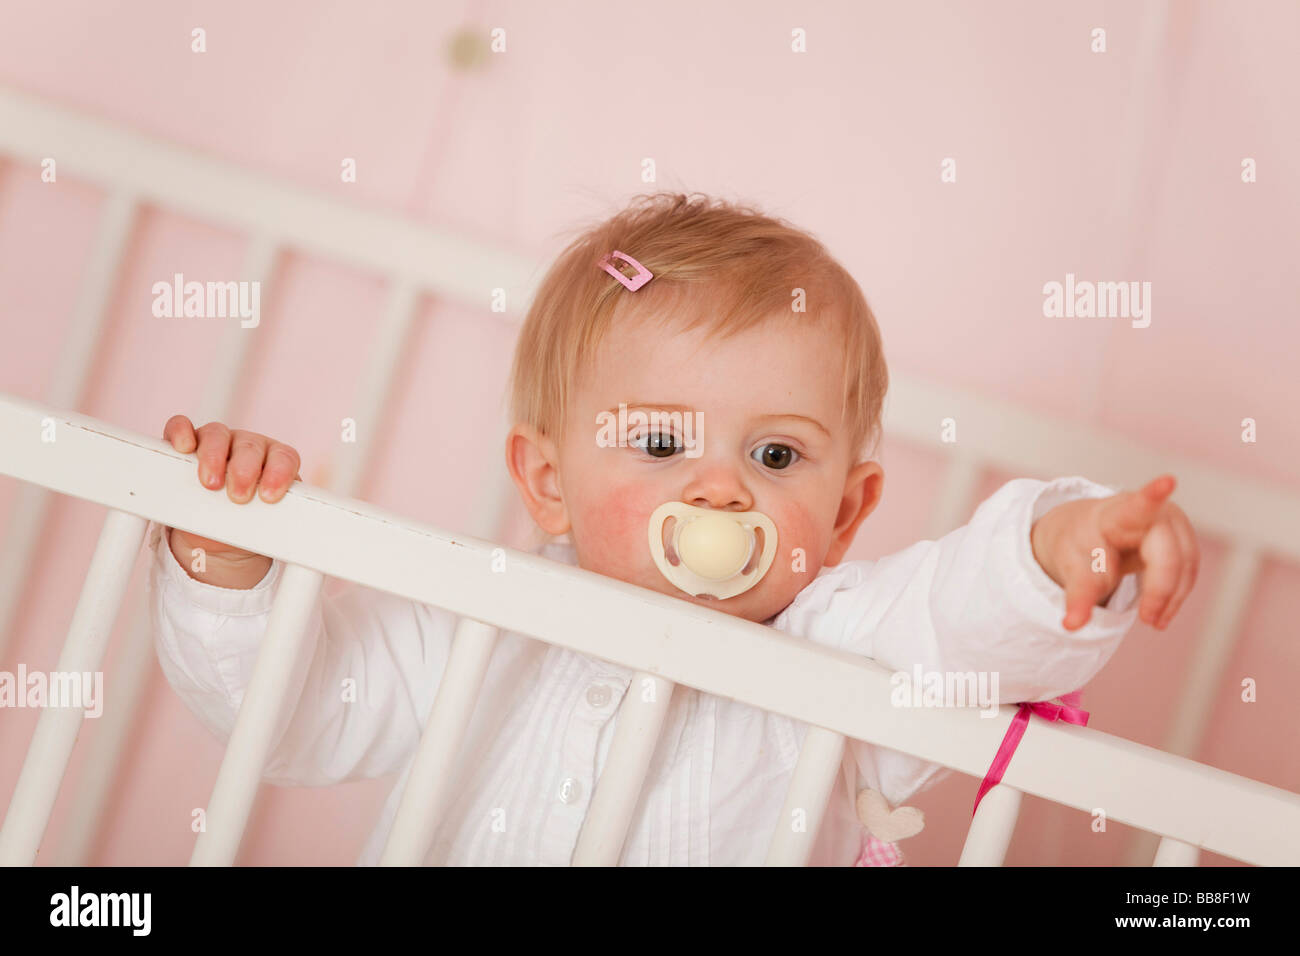 Young girl, 1 year old, with a dummy, looking over the bars of her cot, pointing at something Stock Photo